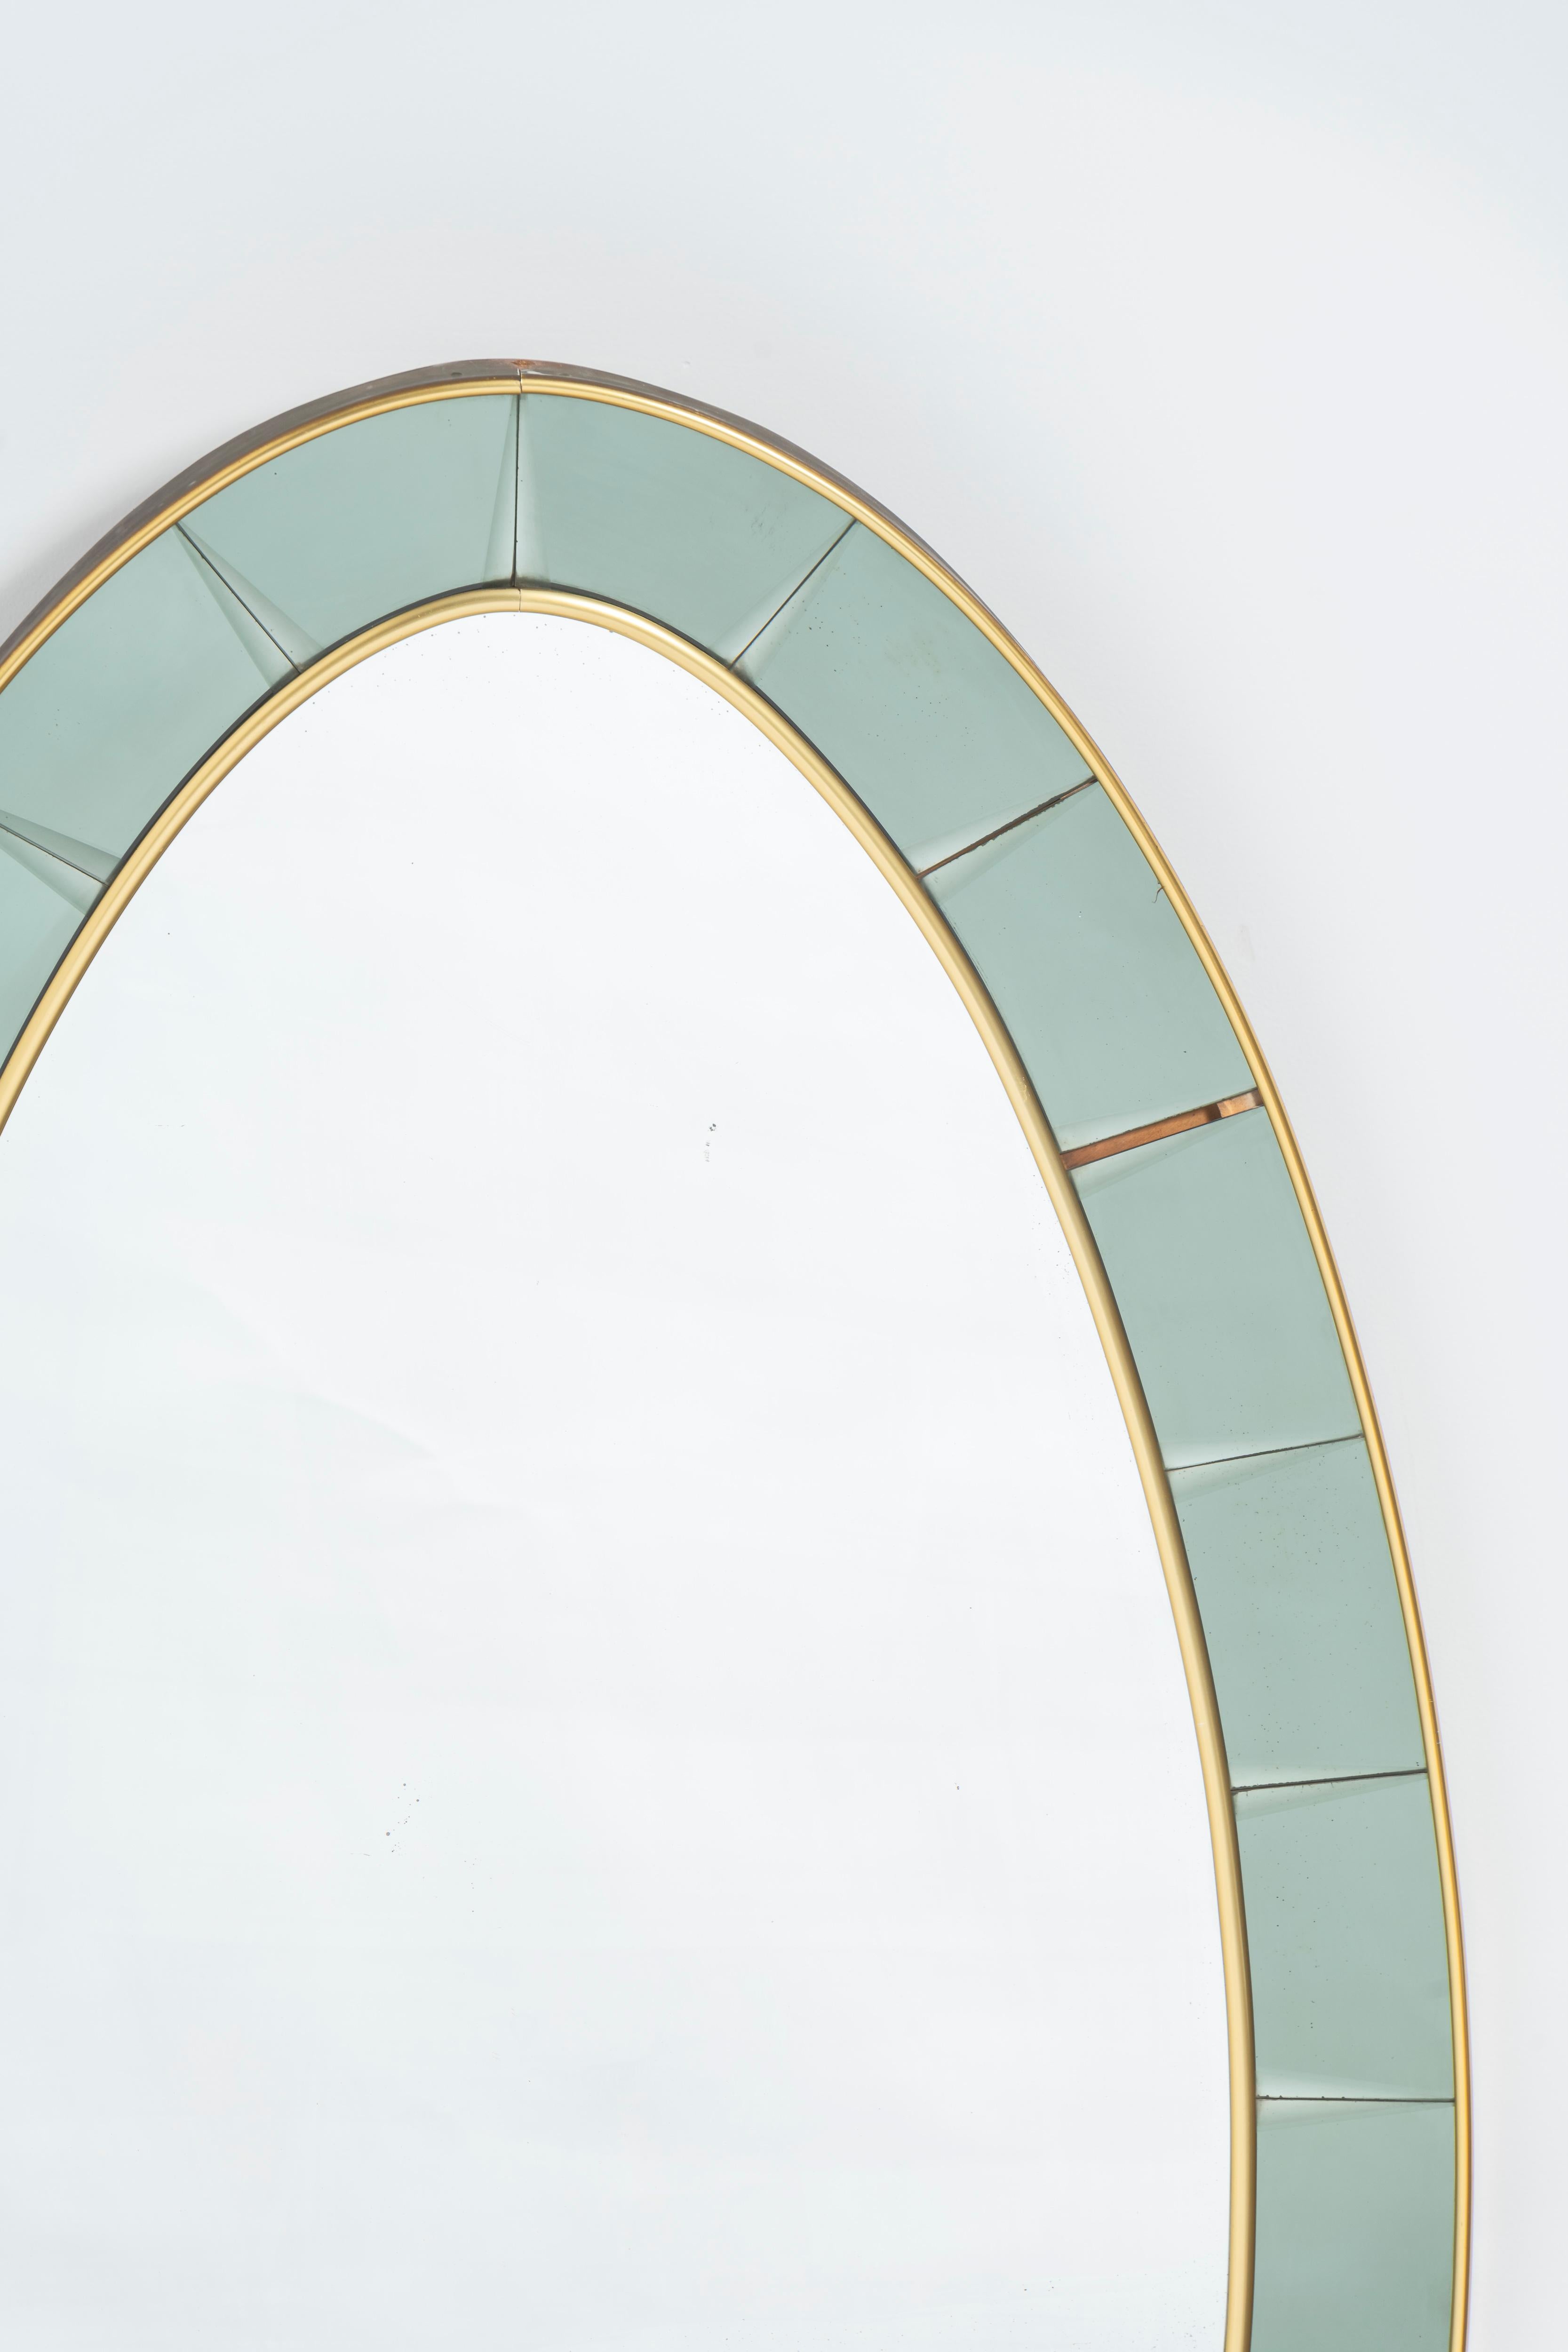 With its strong oval shaped design, this beautiful mirror was made by Cristal Arte in the early 1950s. This wall console mirror features a light green colored crystal edging with brass frame border and trim, with a thick Murano glass shelf. A